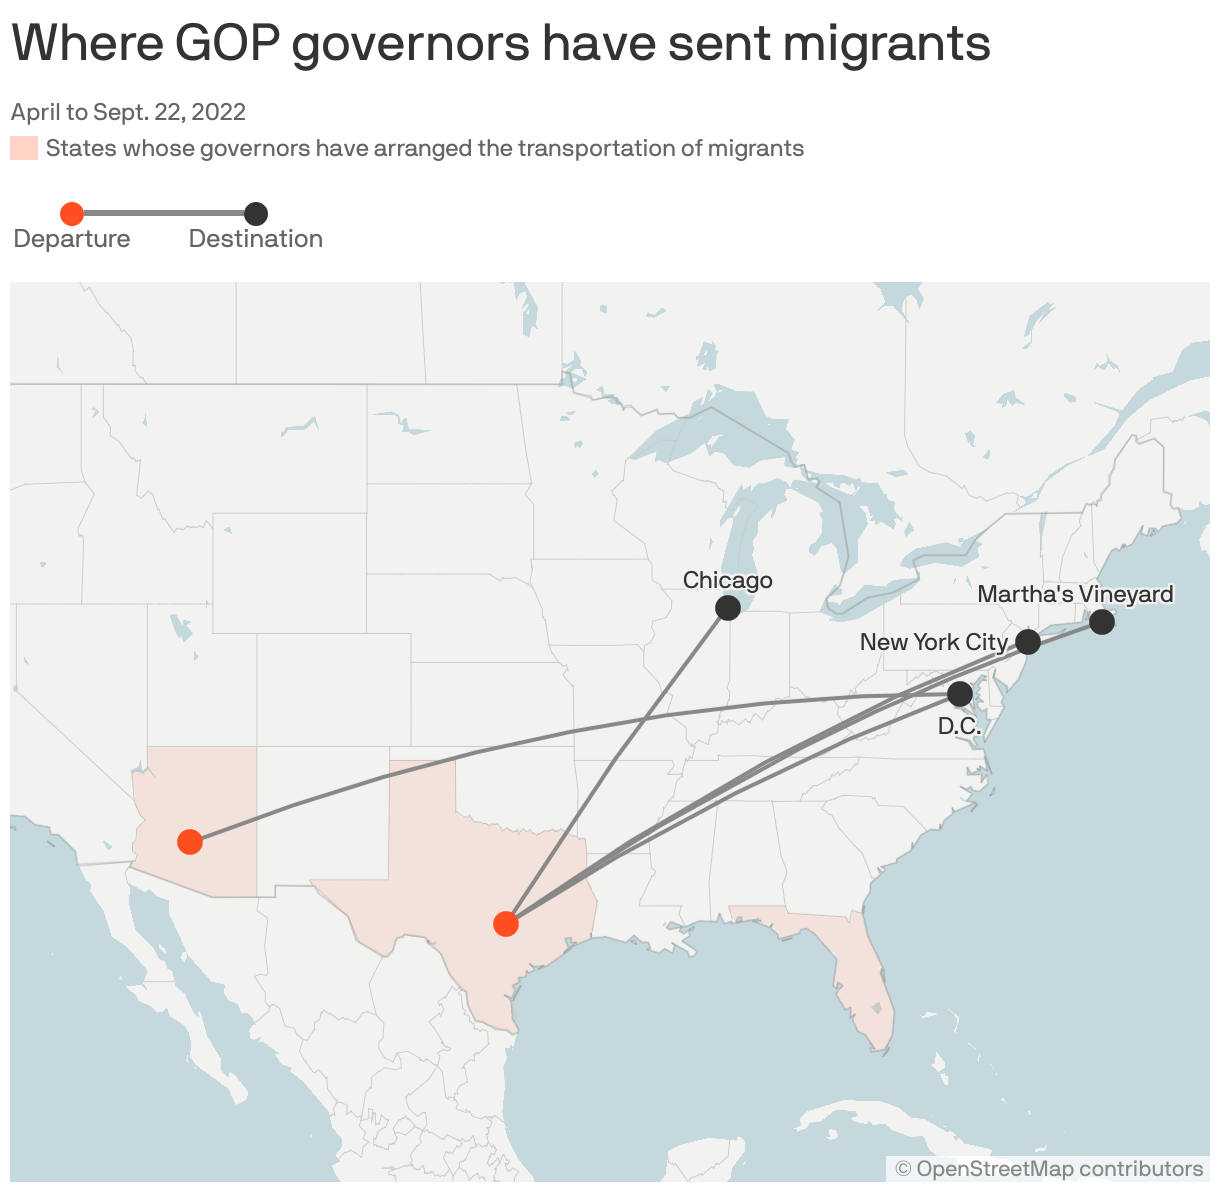 Where GOP governors have sent migrants